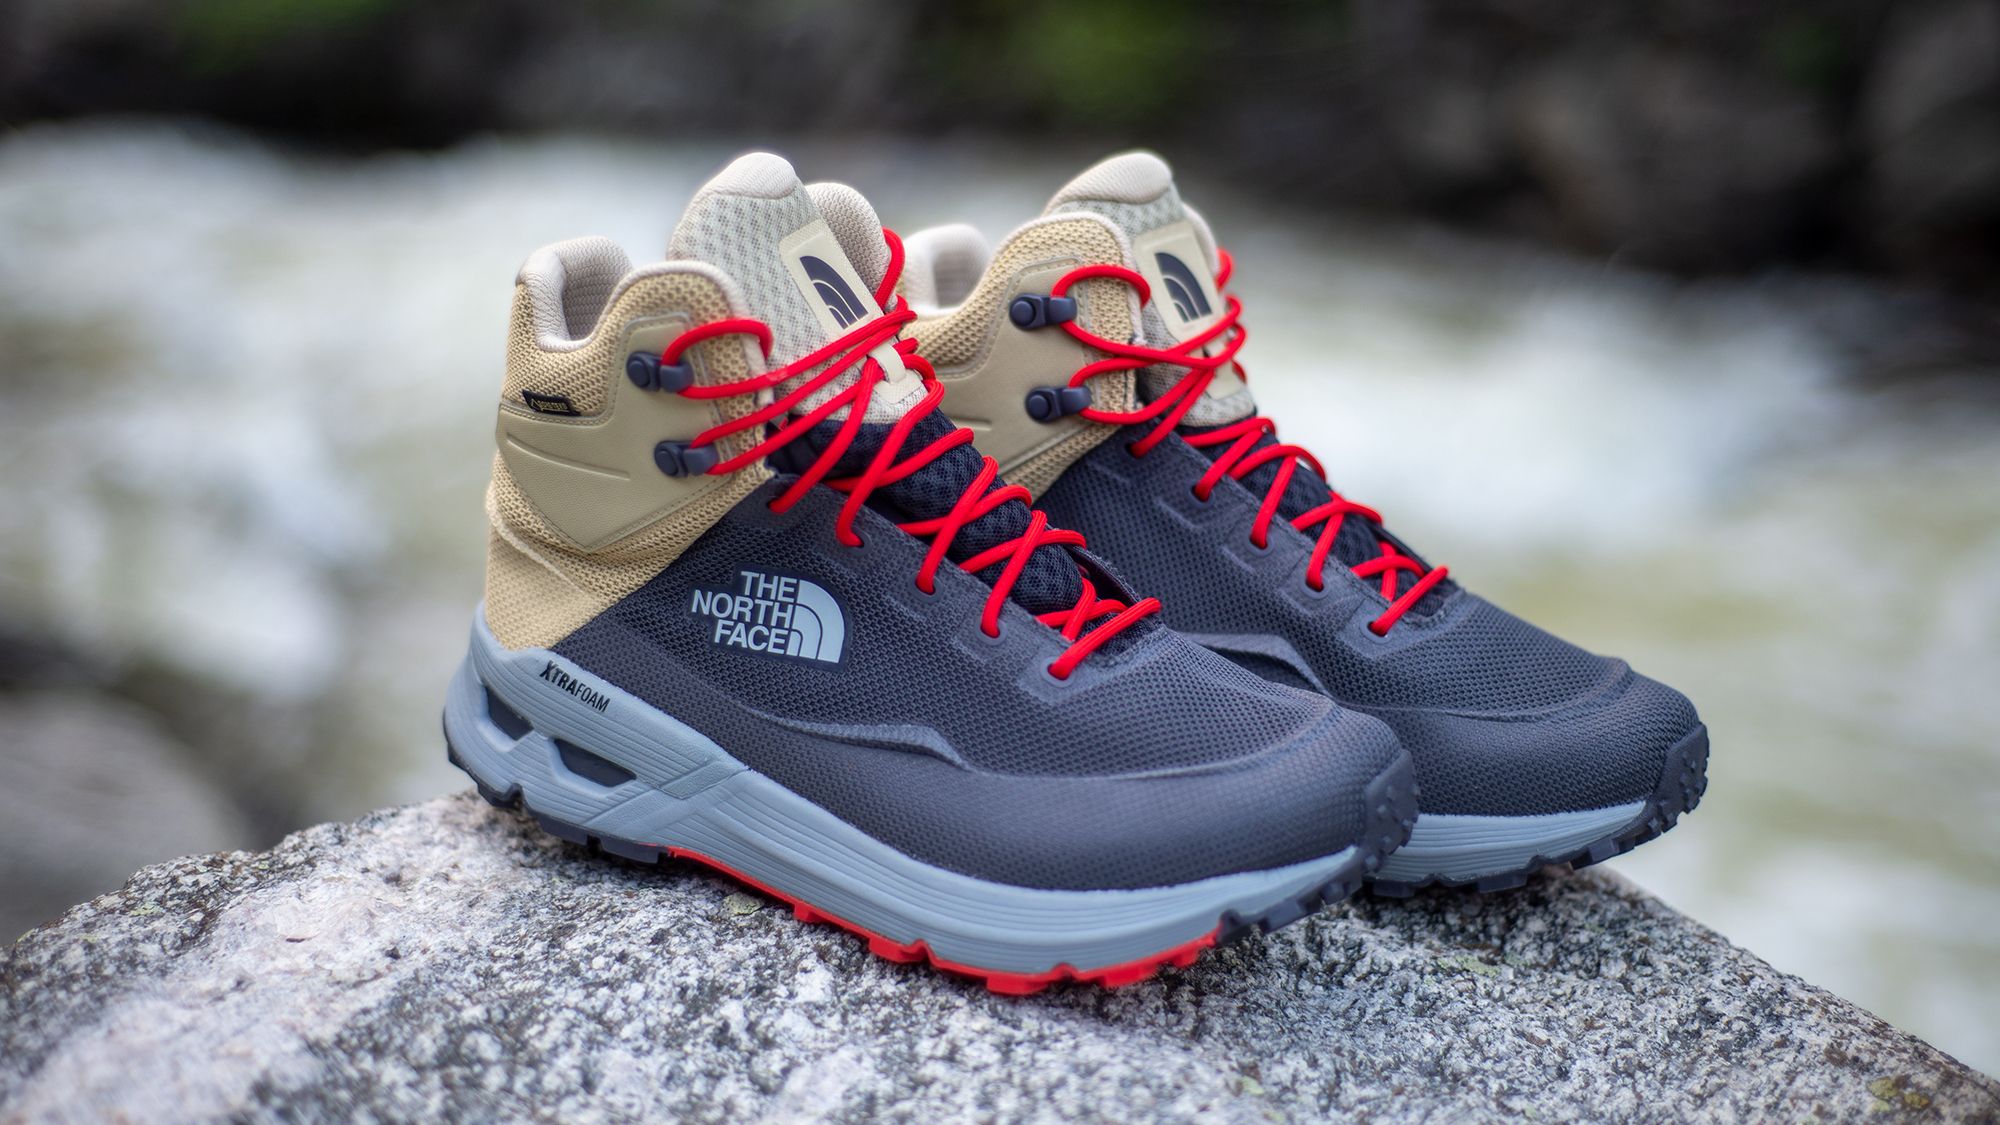 The North Face Geodome 4D Mid GTX